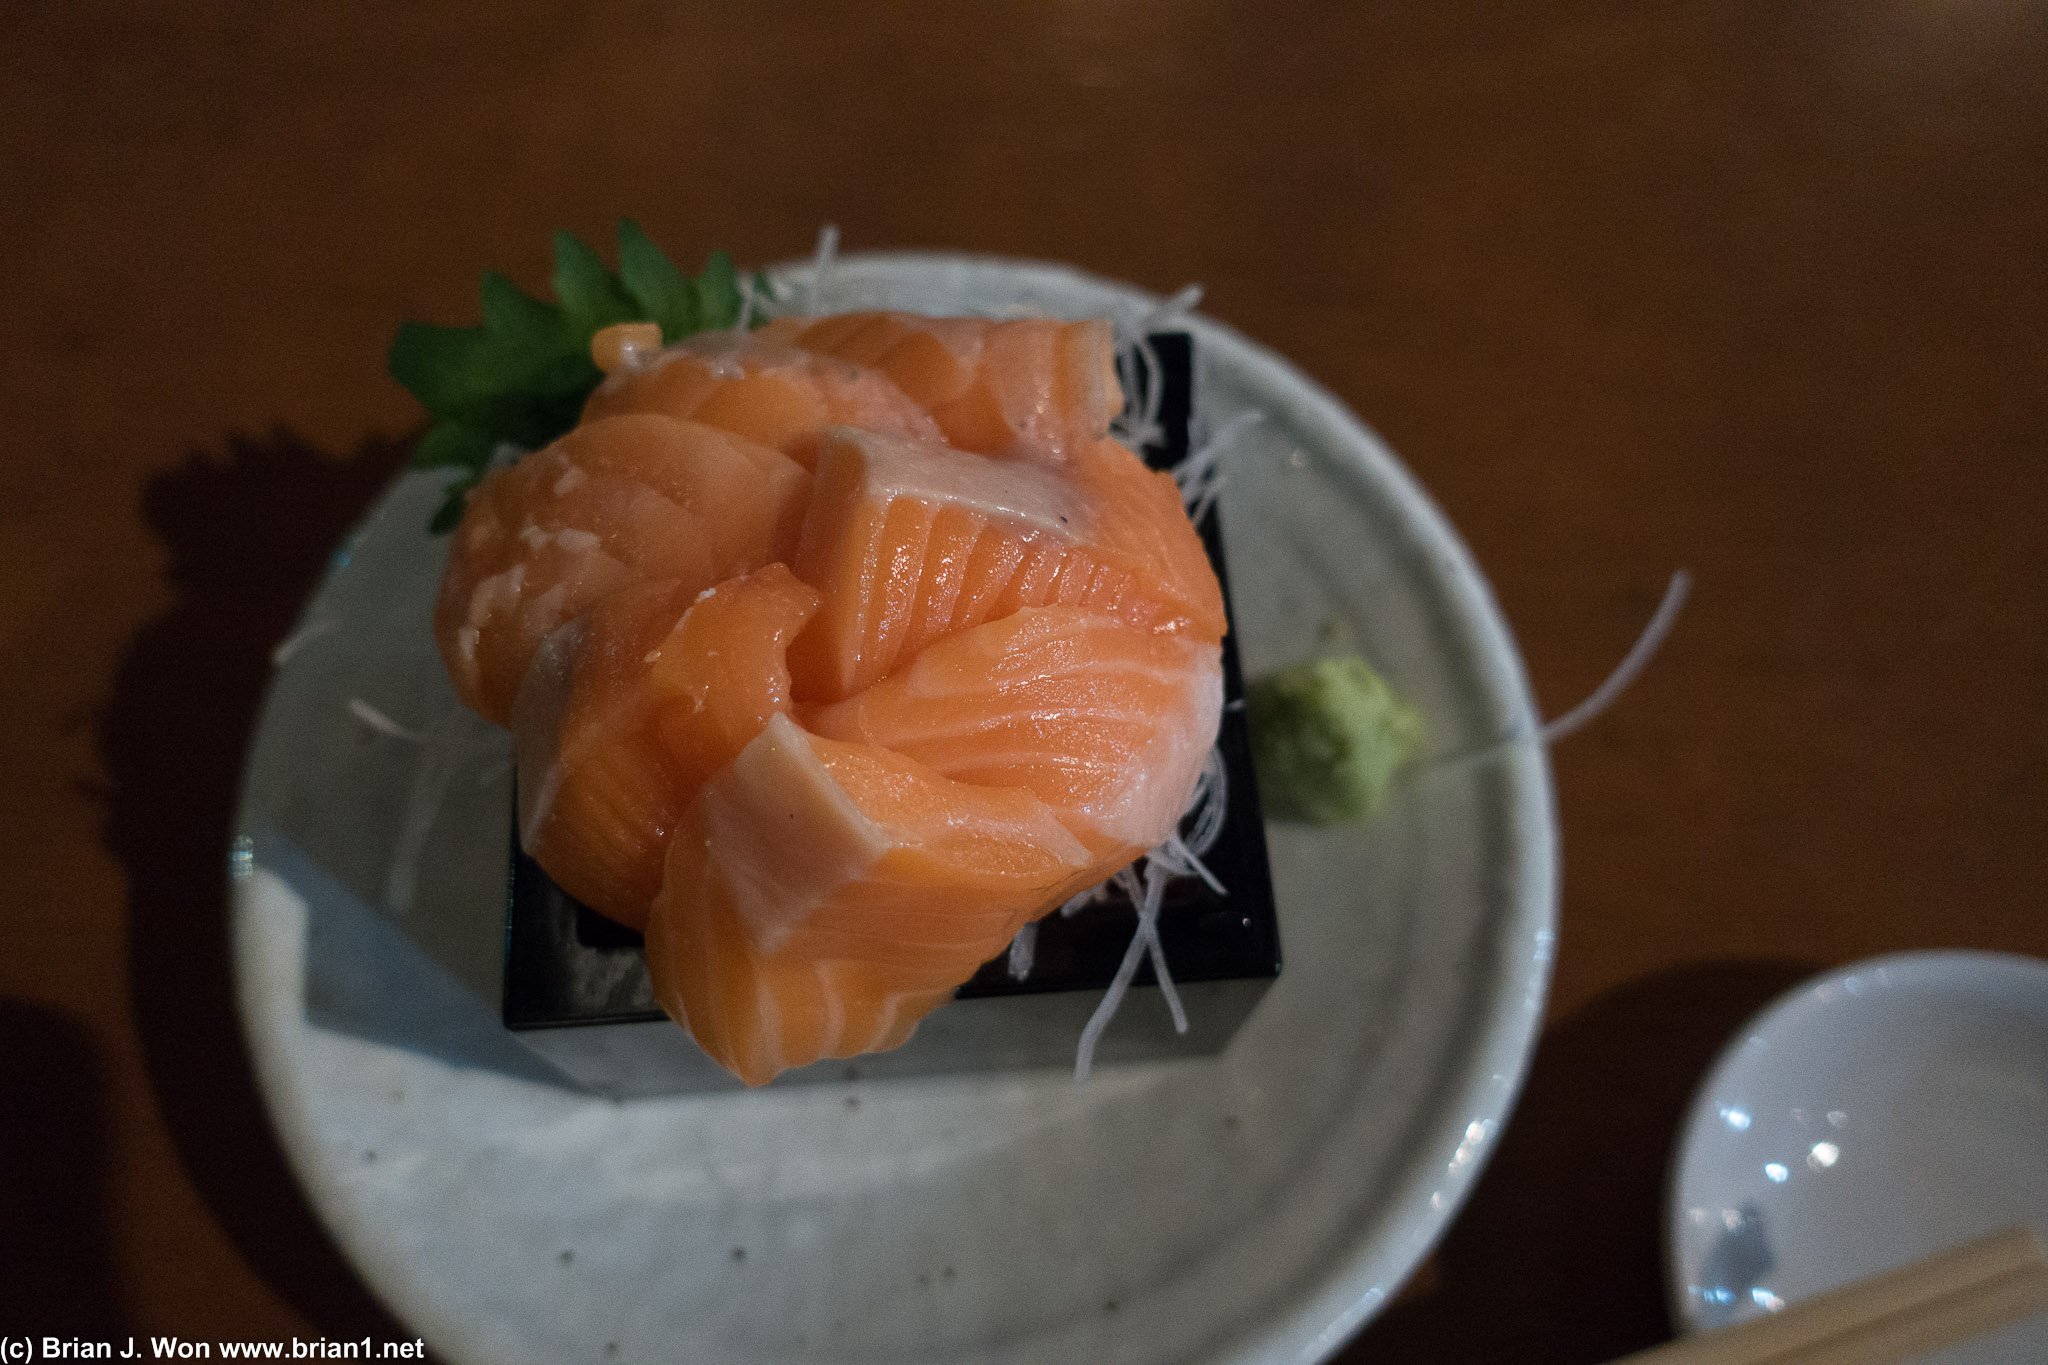 Salmon sashimi. Might skip this the next time... salmon here is good but not THAT good.